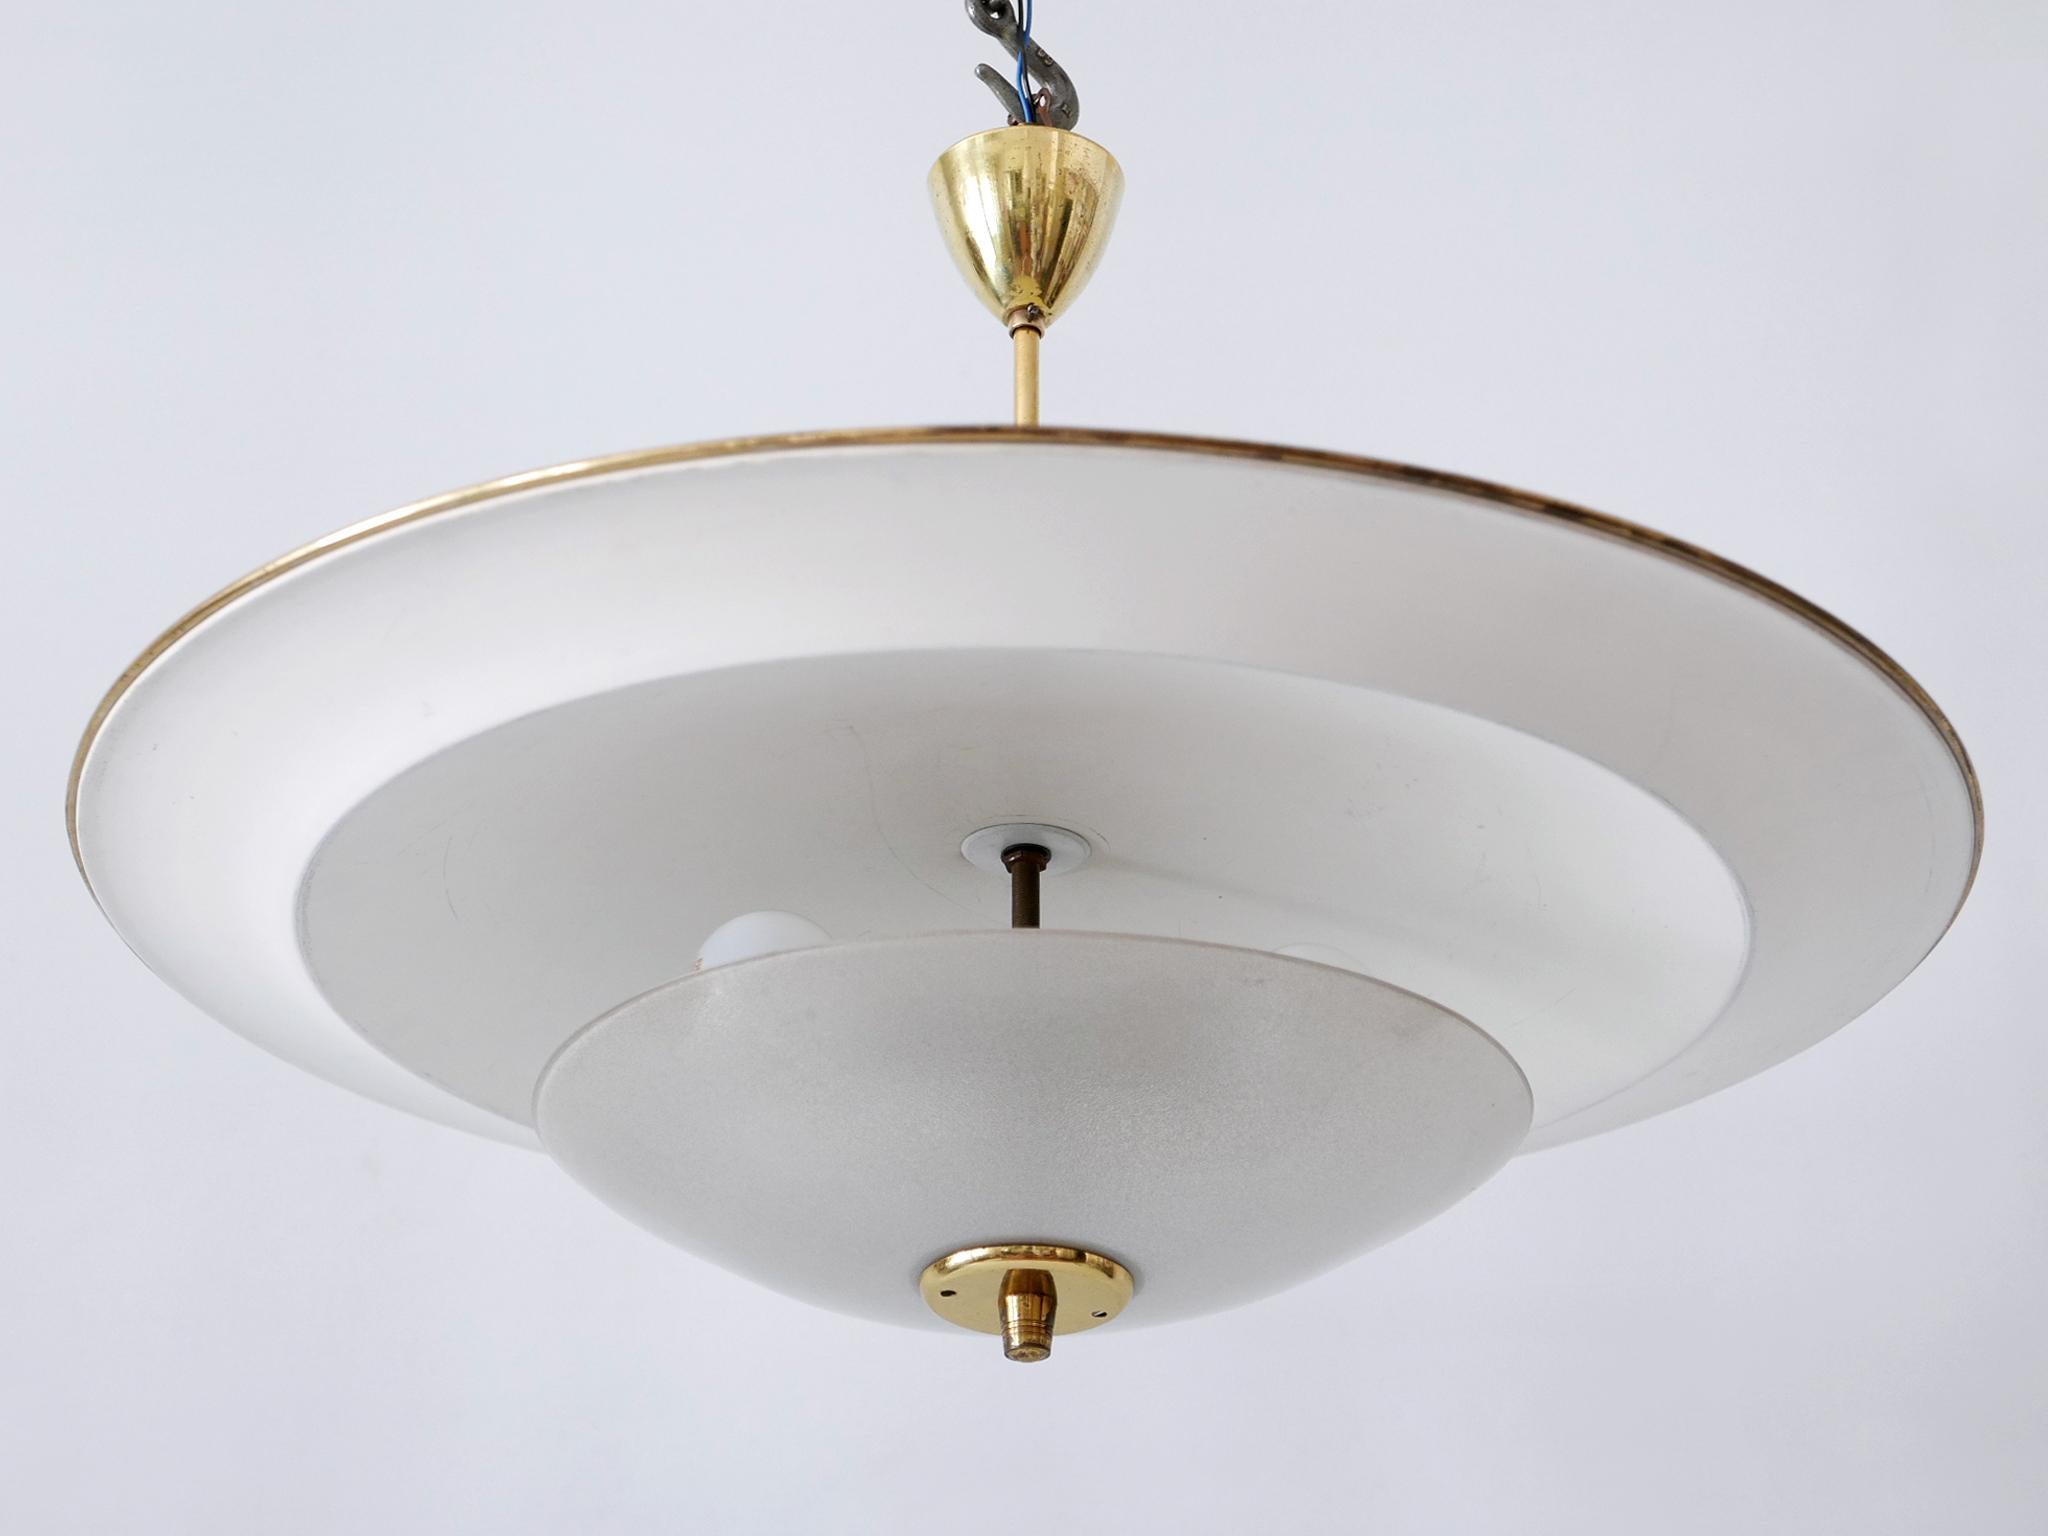 Large, rare and highly decorative Mid-Century Modern 'Ufo' ceiling light or pendant lamp. Designed & manufactured in Germany, 1950s.

Executed in aluminum sheet, textured glass and brass, the pendant lamp needs 3 x E27 / E26 Edison screw fit bulbs.